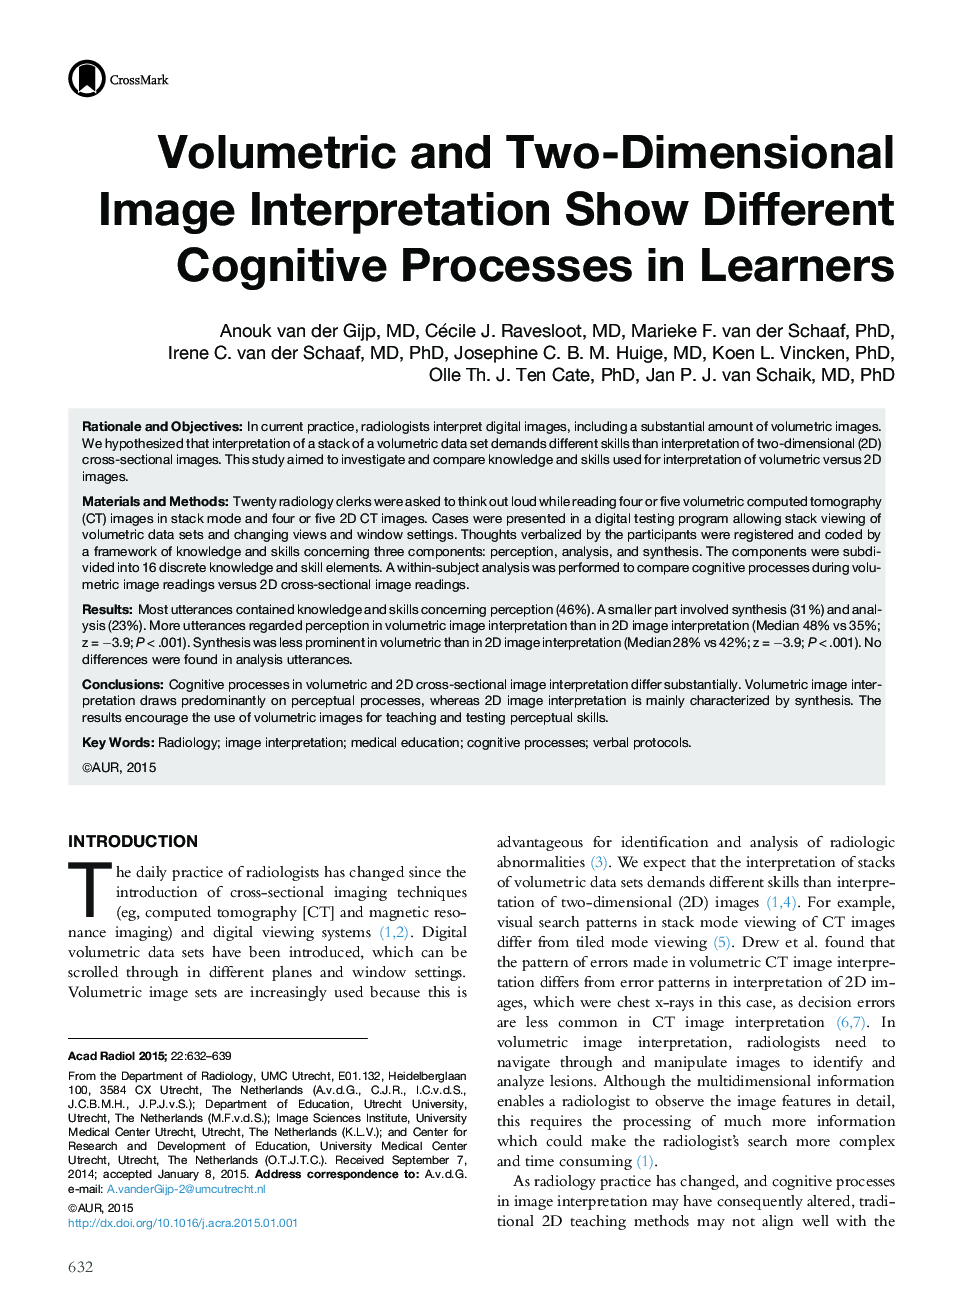 Volumetric and Two-Dimensional Image Interpretation Show Different Cognitive Processes in Learners